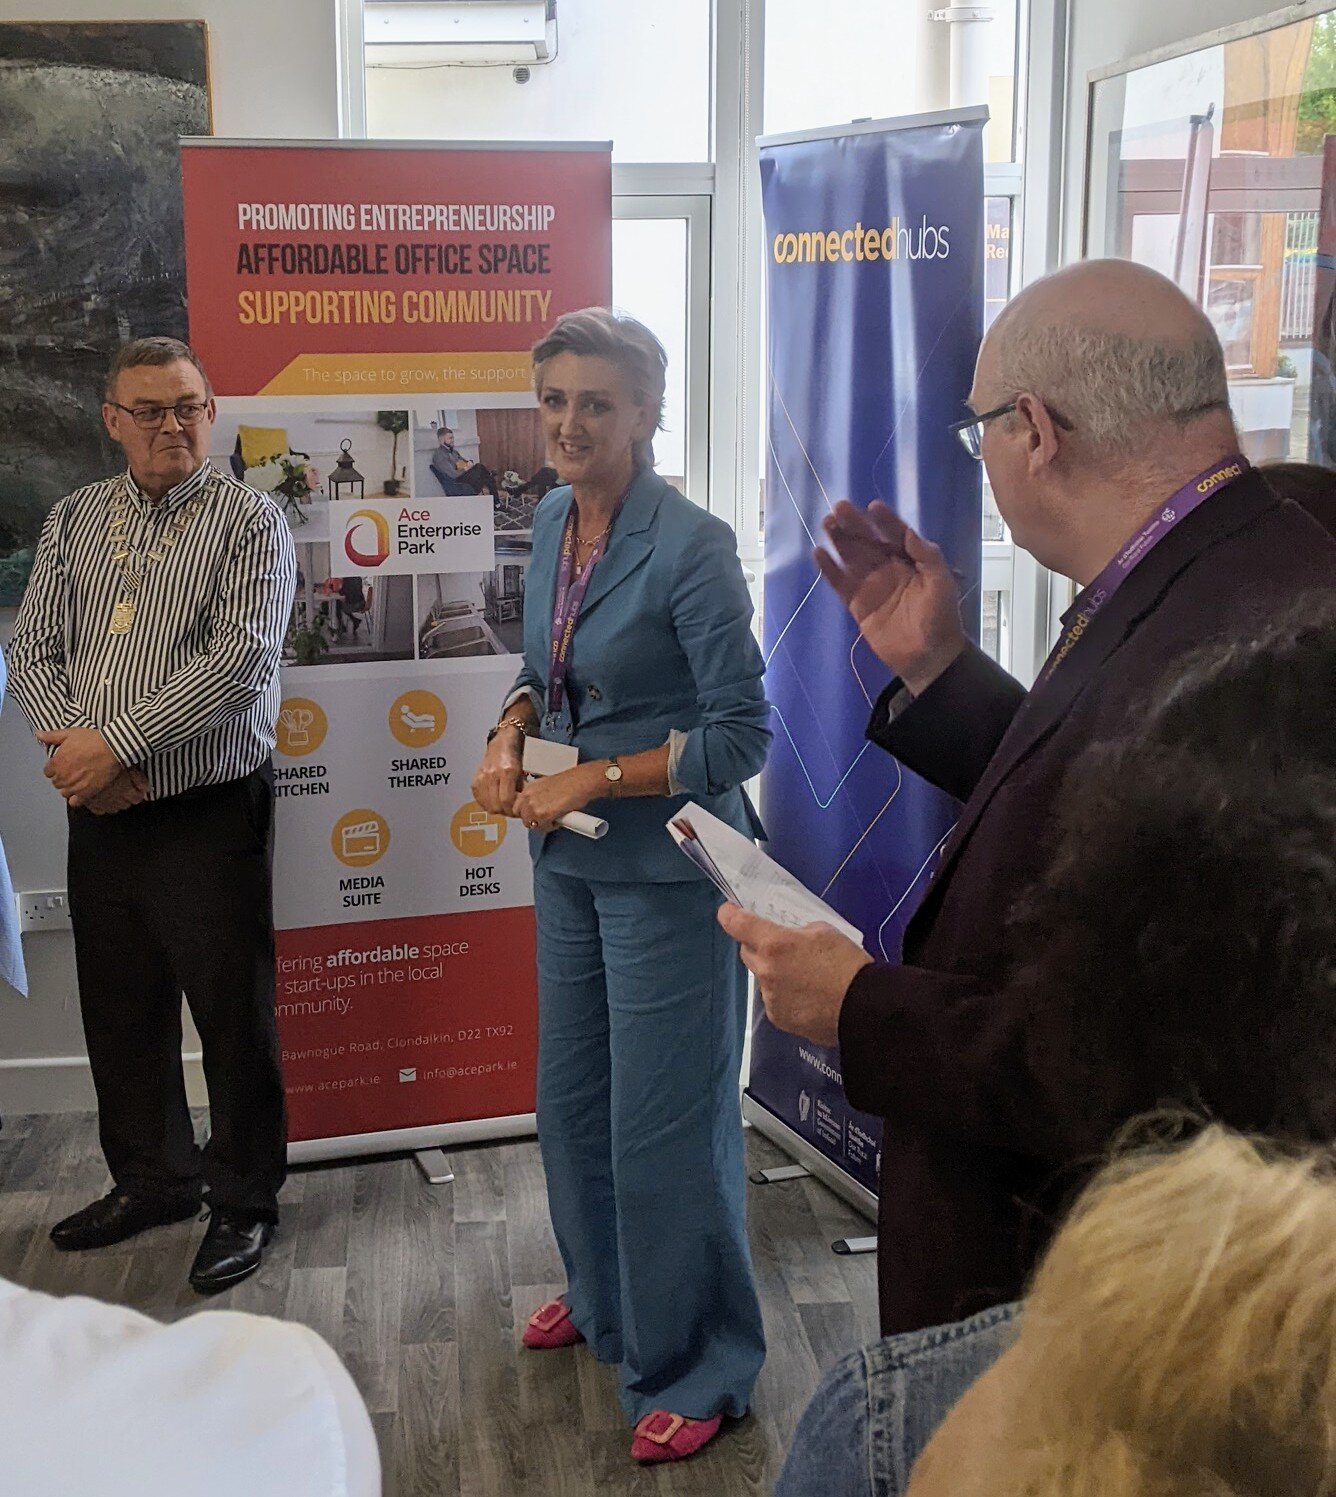 Art in the Hubs had its first exhibition in Clondalkin Ace enterprise hub last month.  CIAS Council member, Joan Mulvihill, shared the inspiration behind this exciting and transformative initiative. With artworks to be rolled out to Hubs across Irela